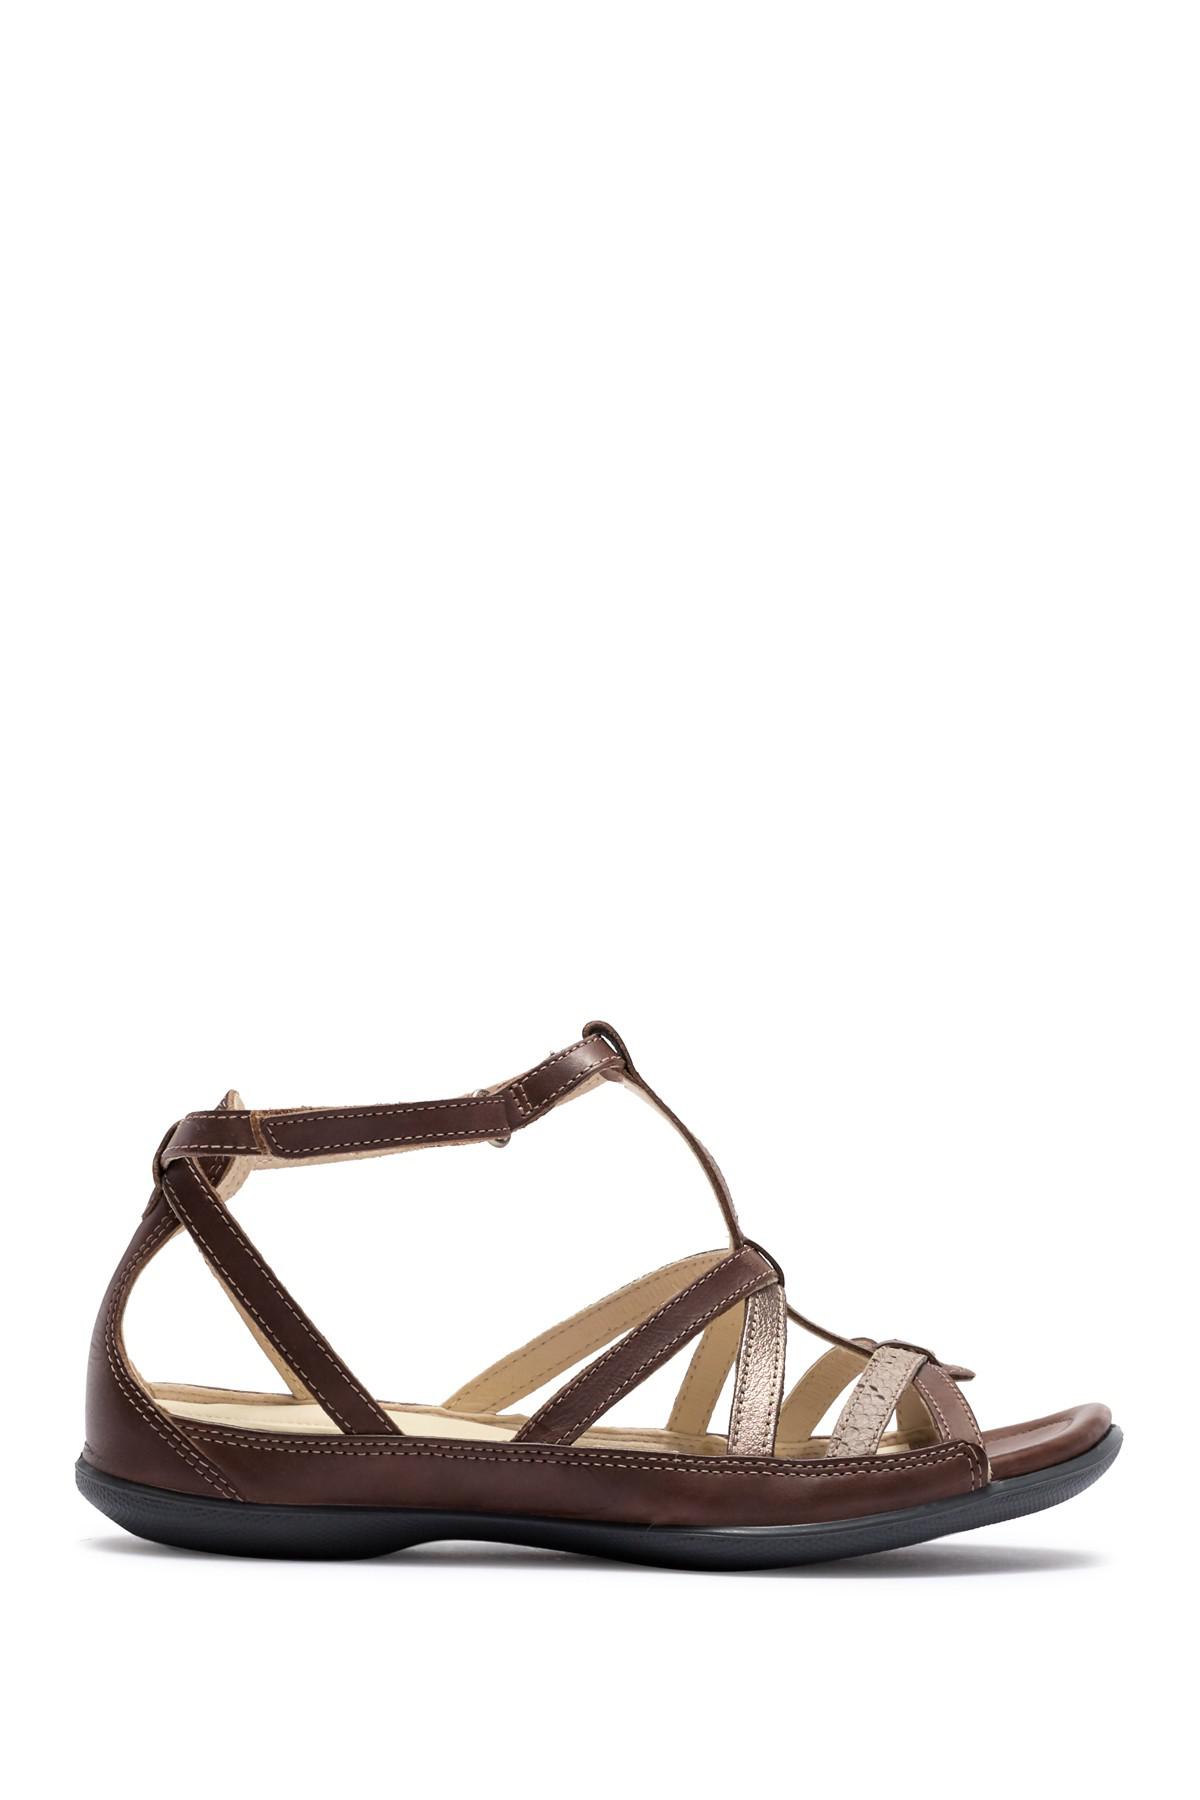 Ecco Leather Flash Low Gladiator Sandal in Brown - Lyst